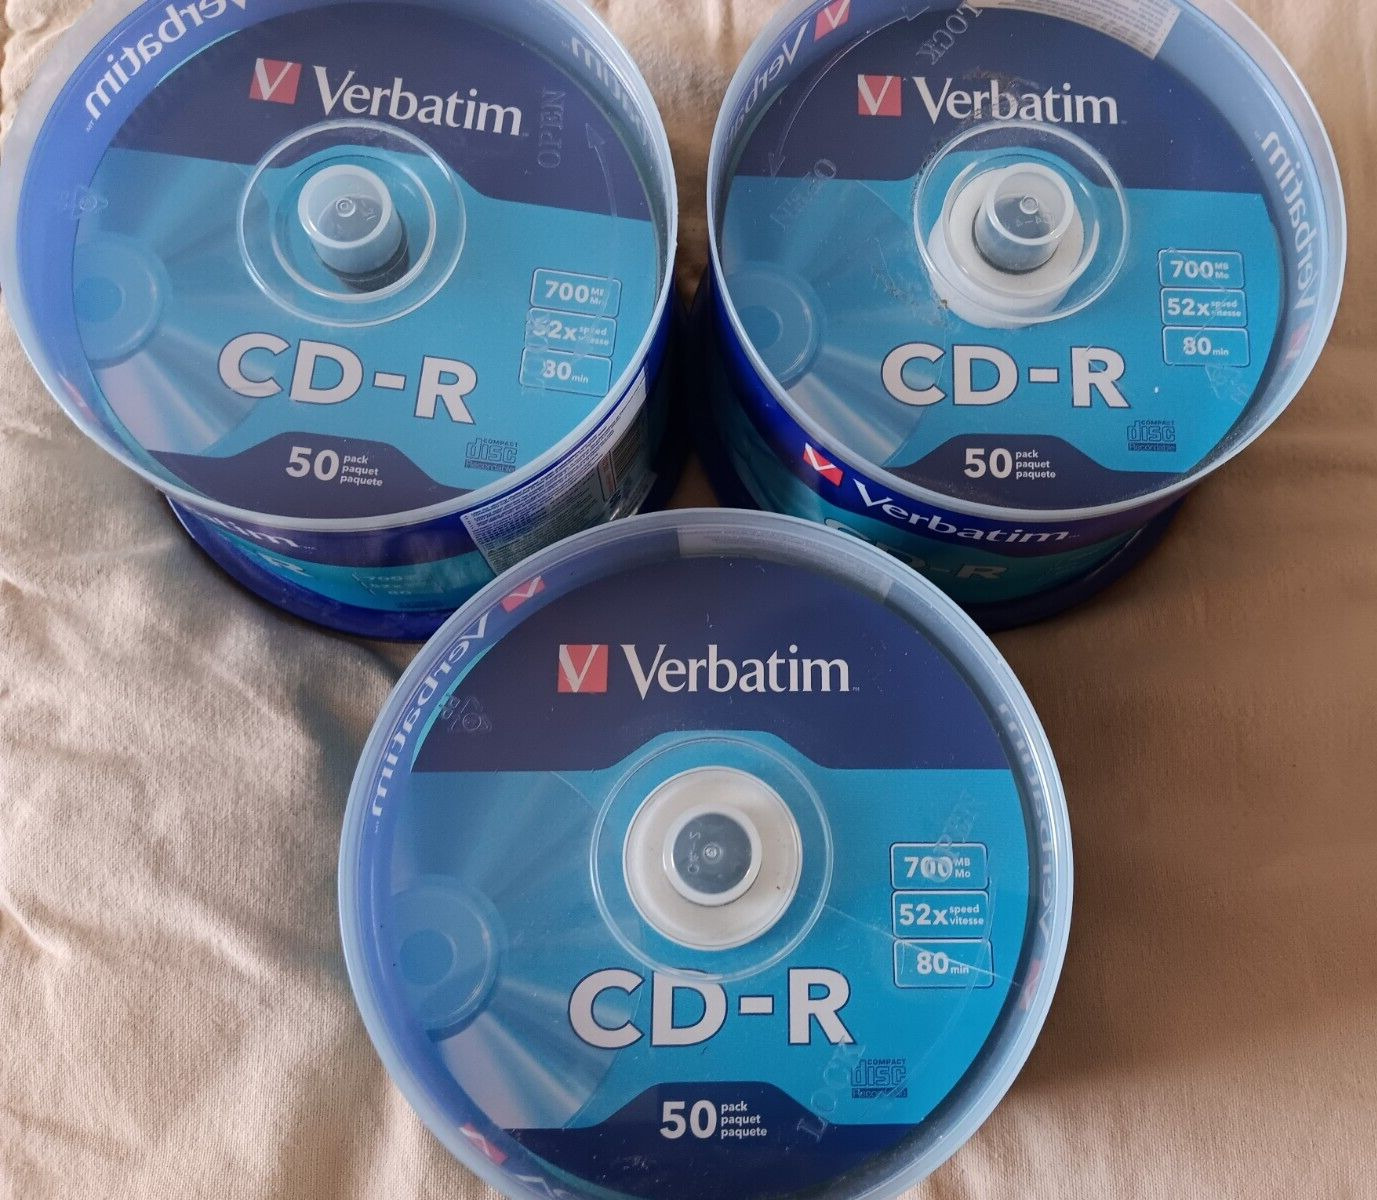 Verbatim CD-R 700MB 52x Speed 80 min Recordable Disc Lot of 3 Pack of 50 94691